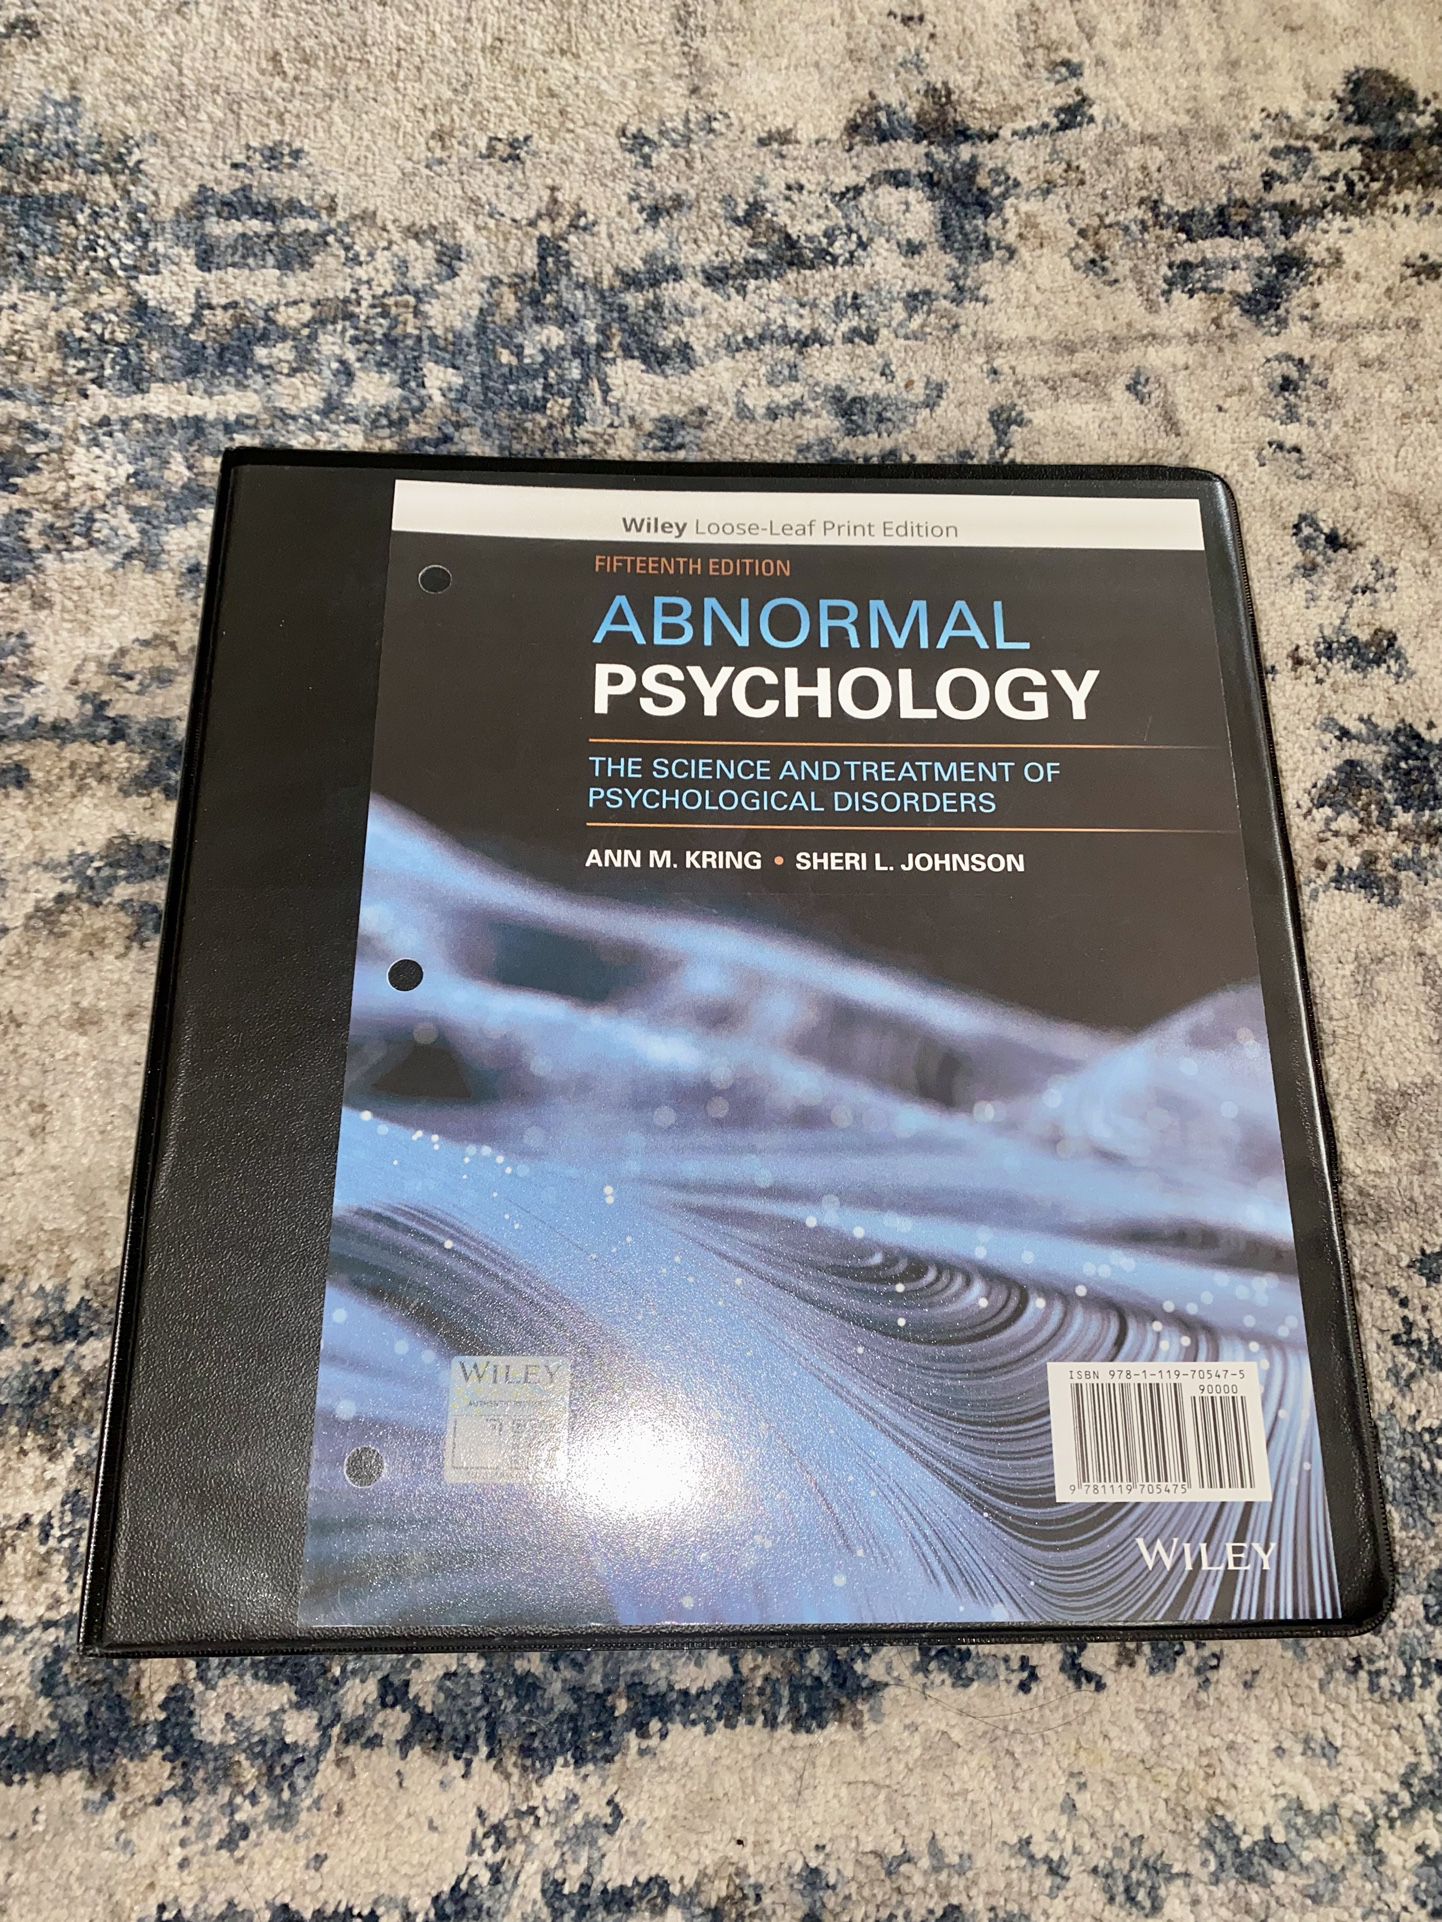 Abnormal Psychology: The Science and Treatment of Psychological Disorders 15th Edition